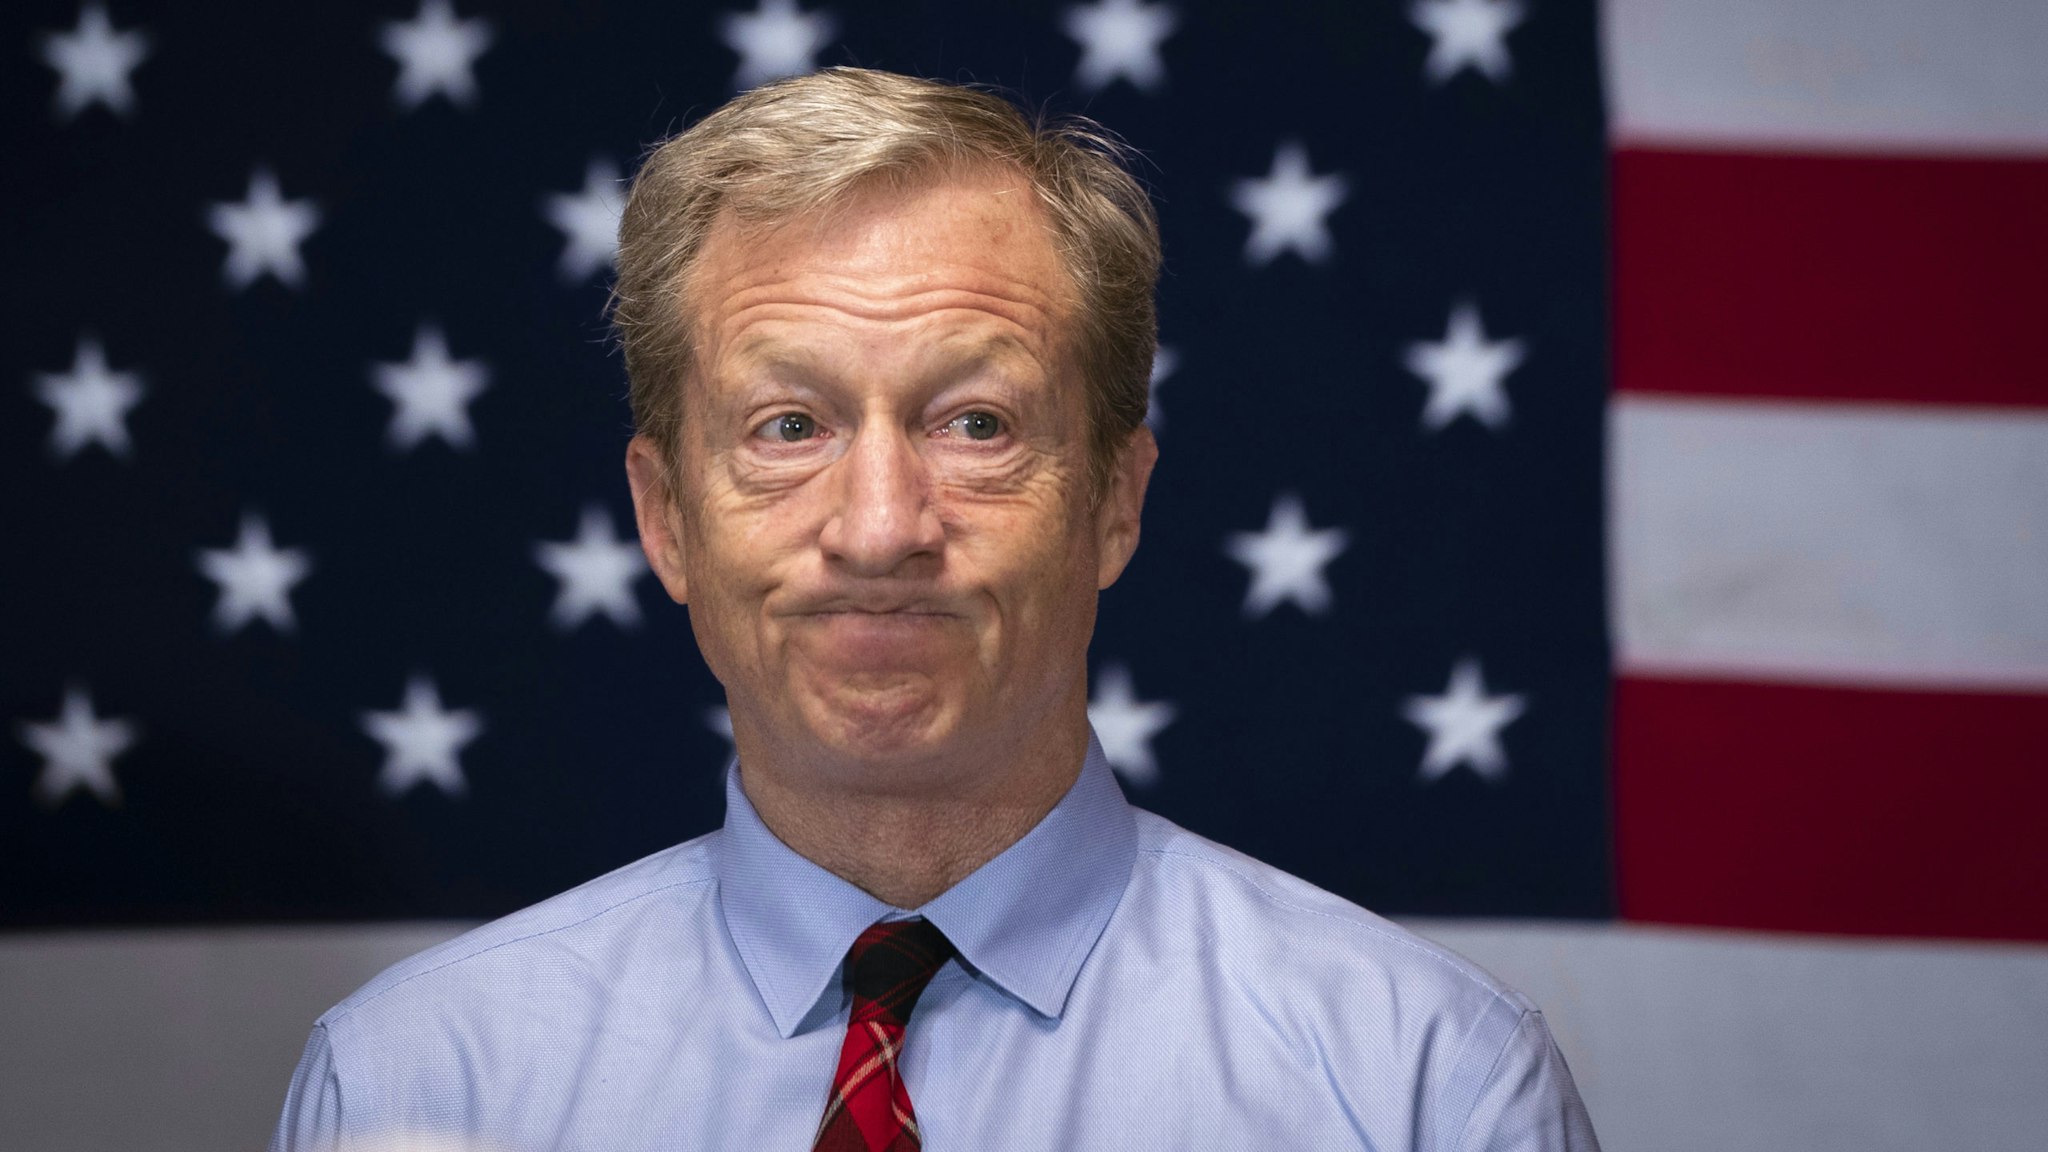 ORANGEBURG, SC - FEBRUARY 27: Democratic presidential candidate Tom Steyer at a town hall meeting on rural healthcare issues on February 27, 2020 in Orangeburg, South Carolina. South Carolina holds its Democratic presidential primary on Saturday, February 29.